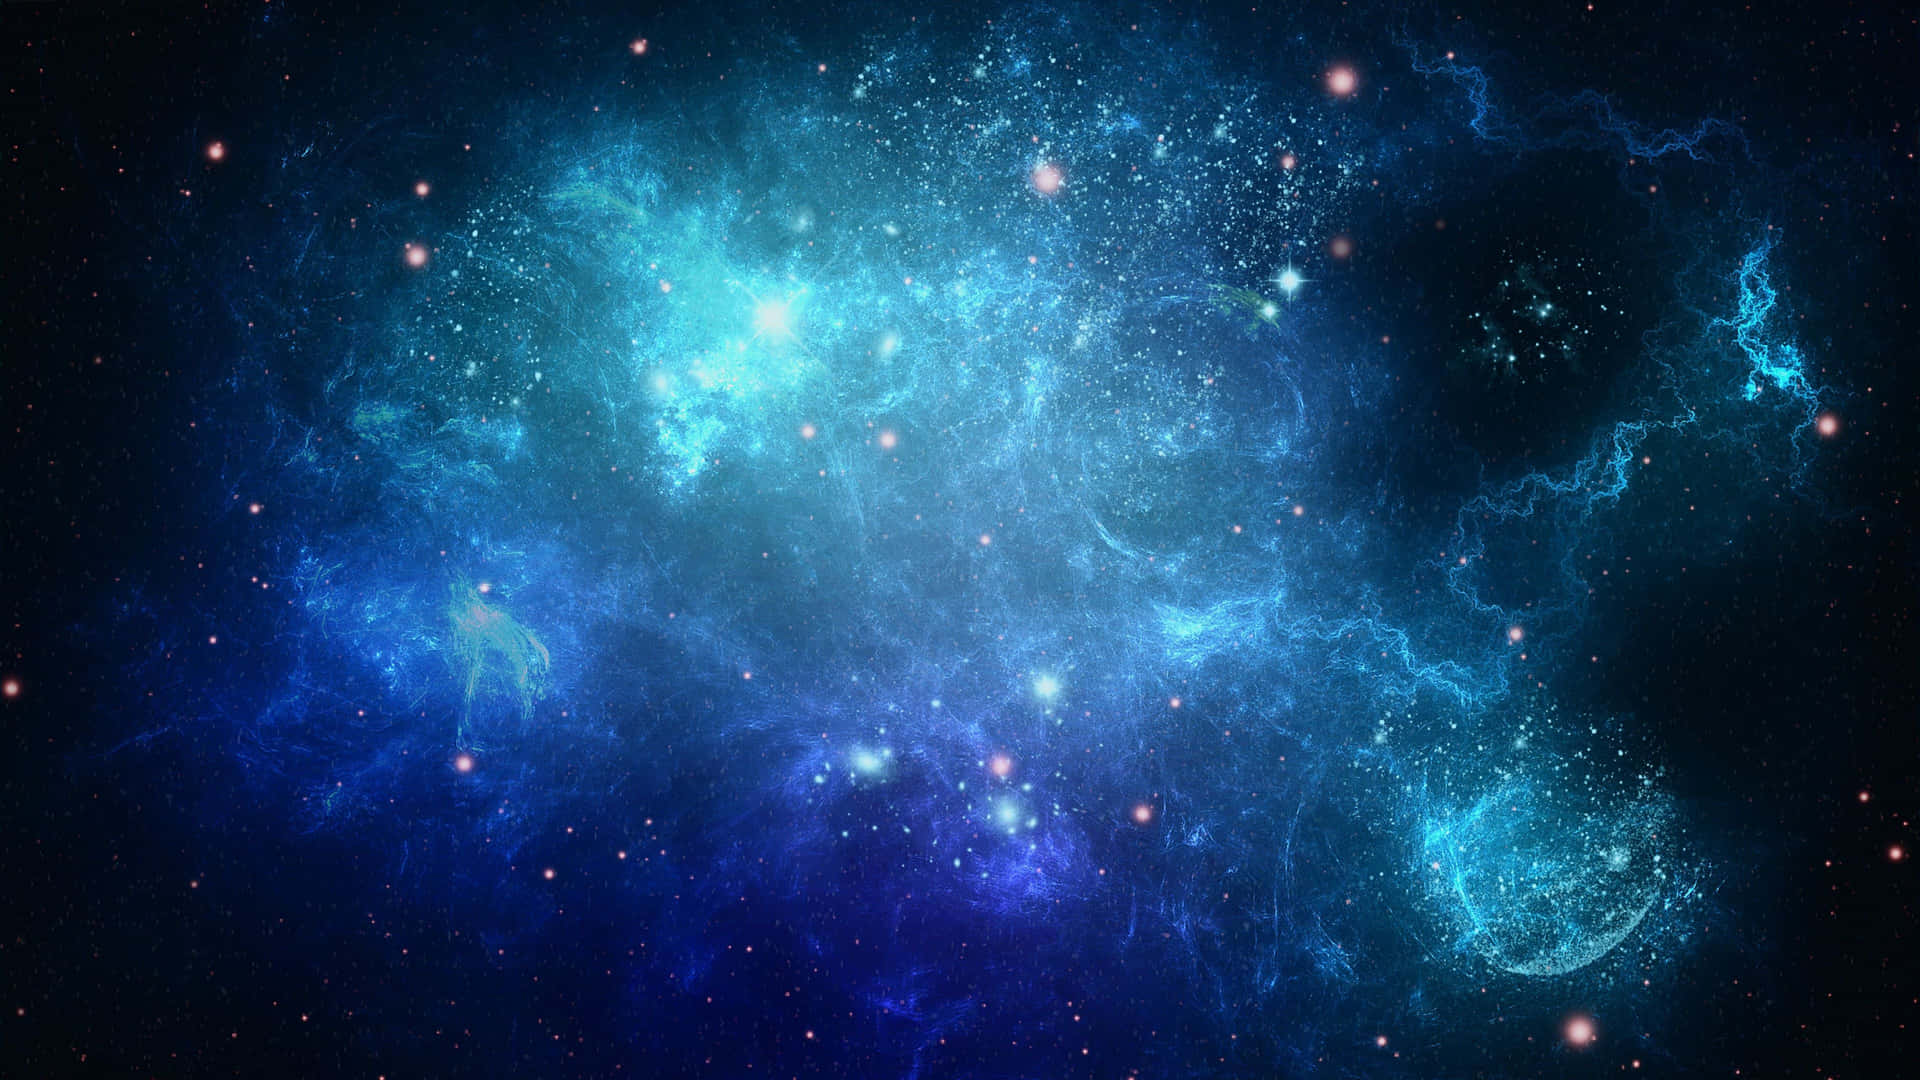 A Beautiful Sky View Of An Amazingly Cool Blue Galaxy Wallpaper